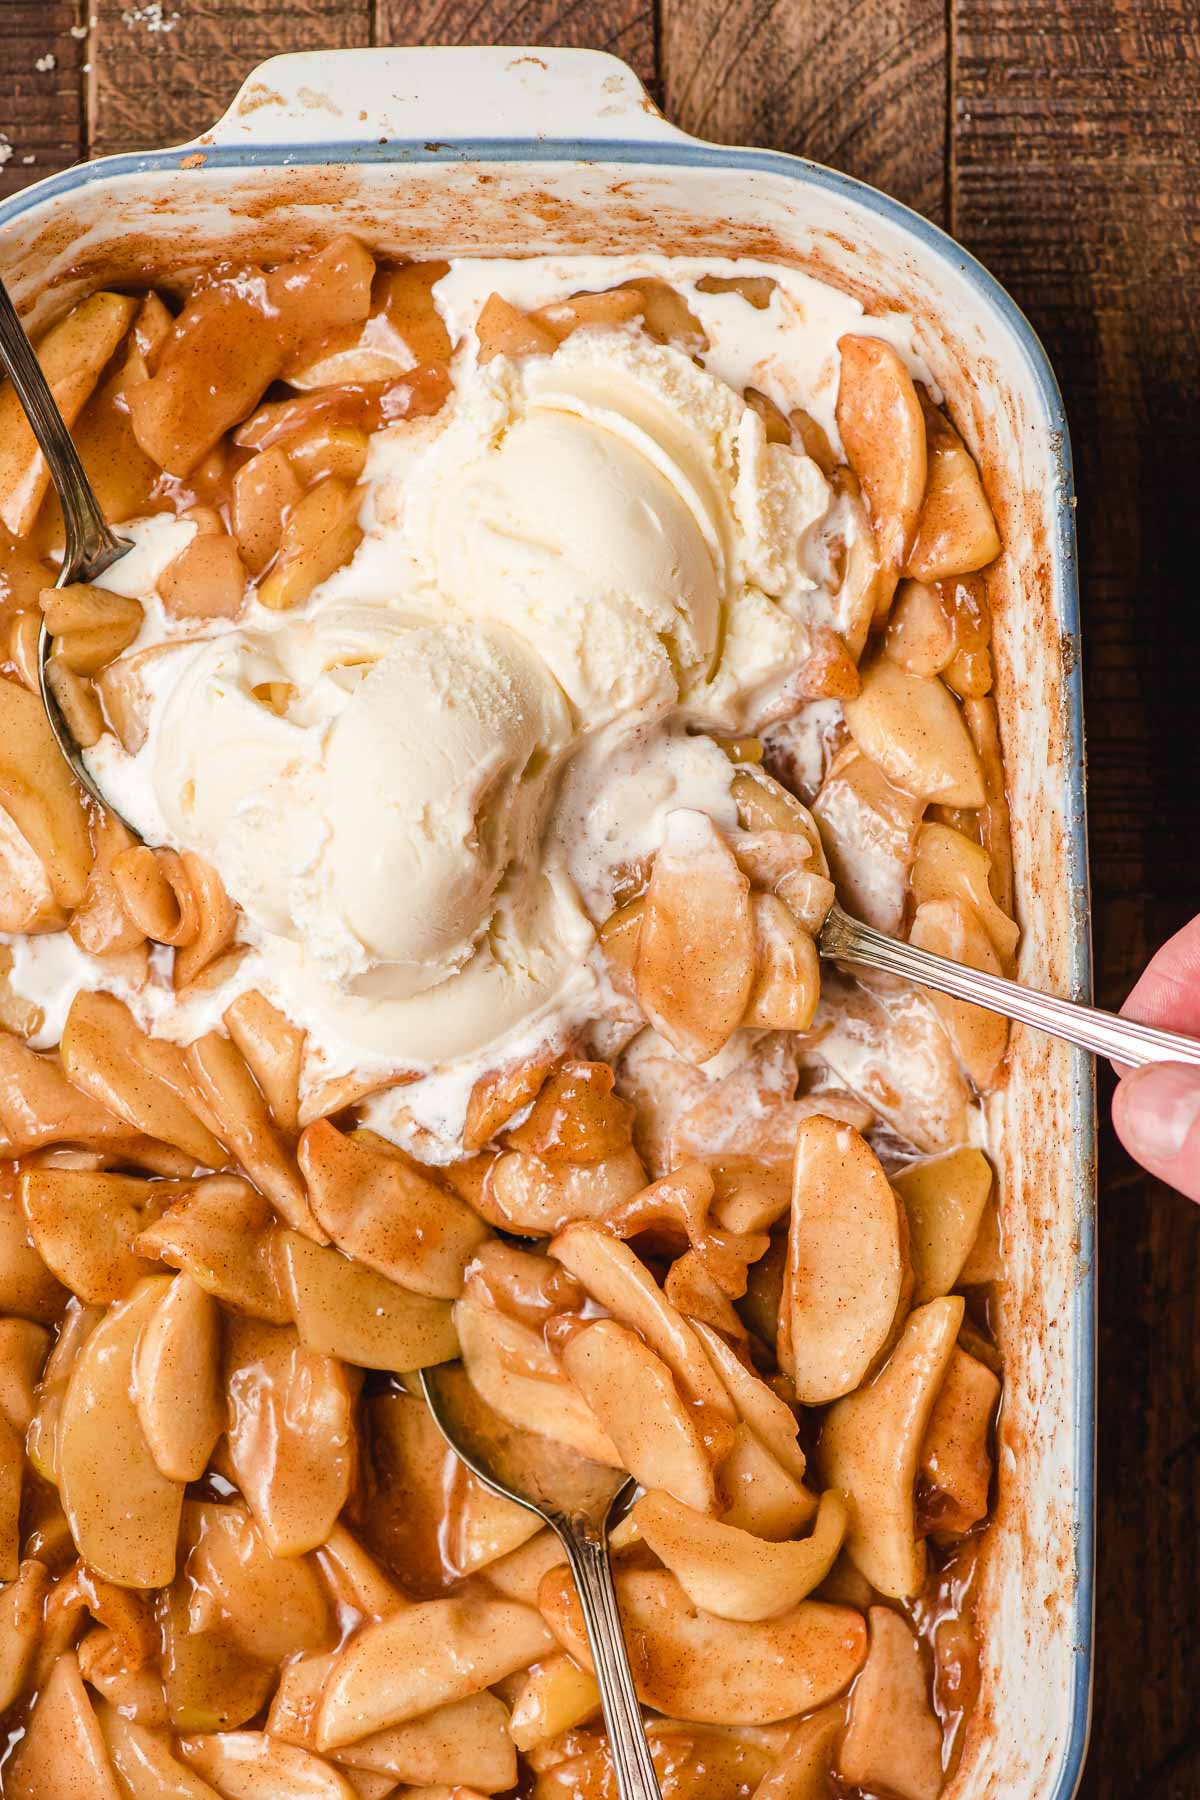 Spoon taking a big bite out of a dish of cinnamon baked apples with pools of melted ice cream.